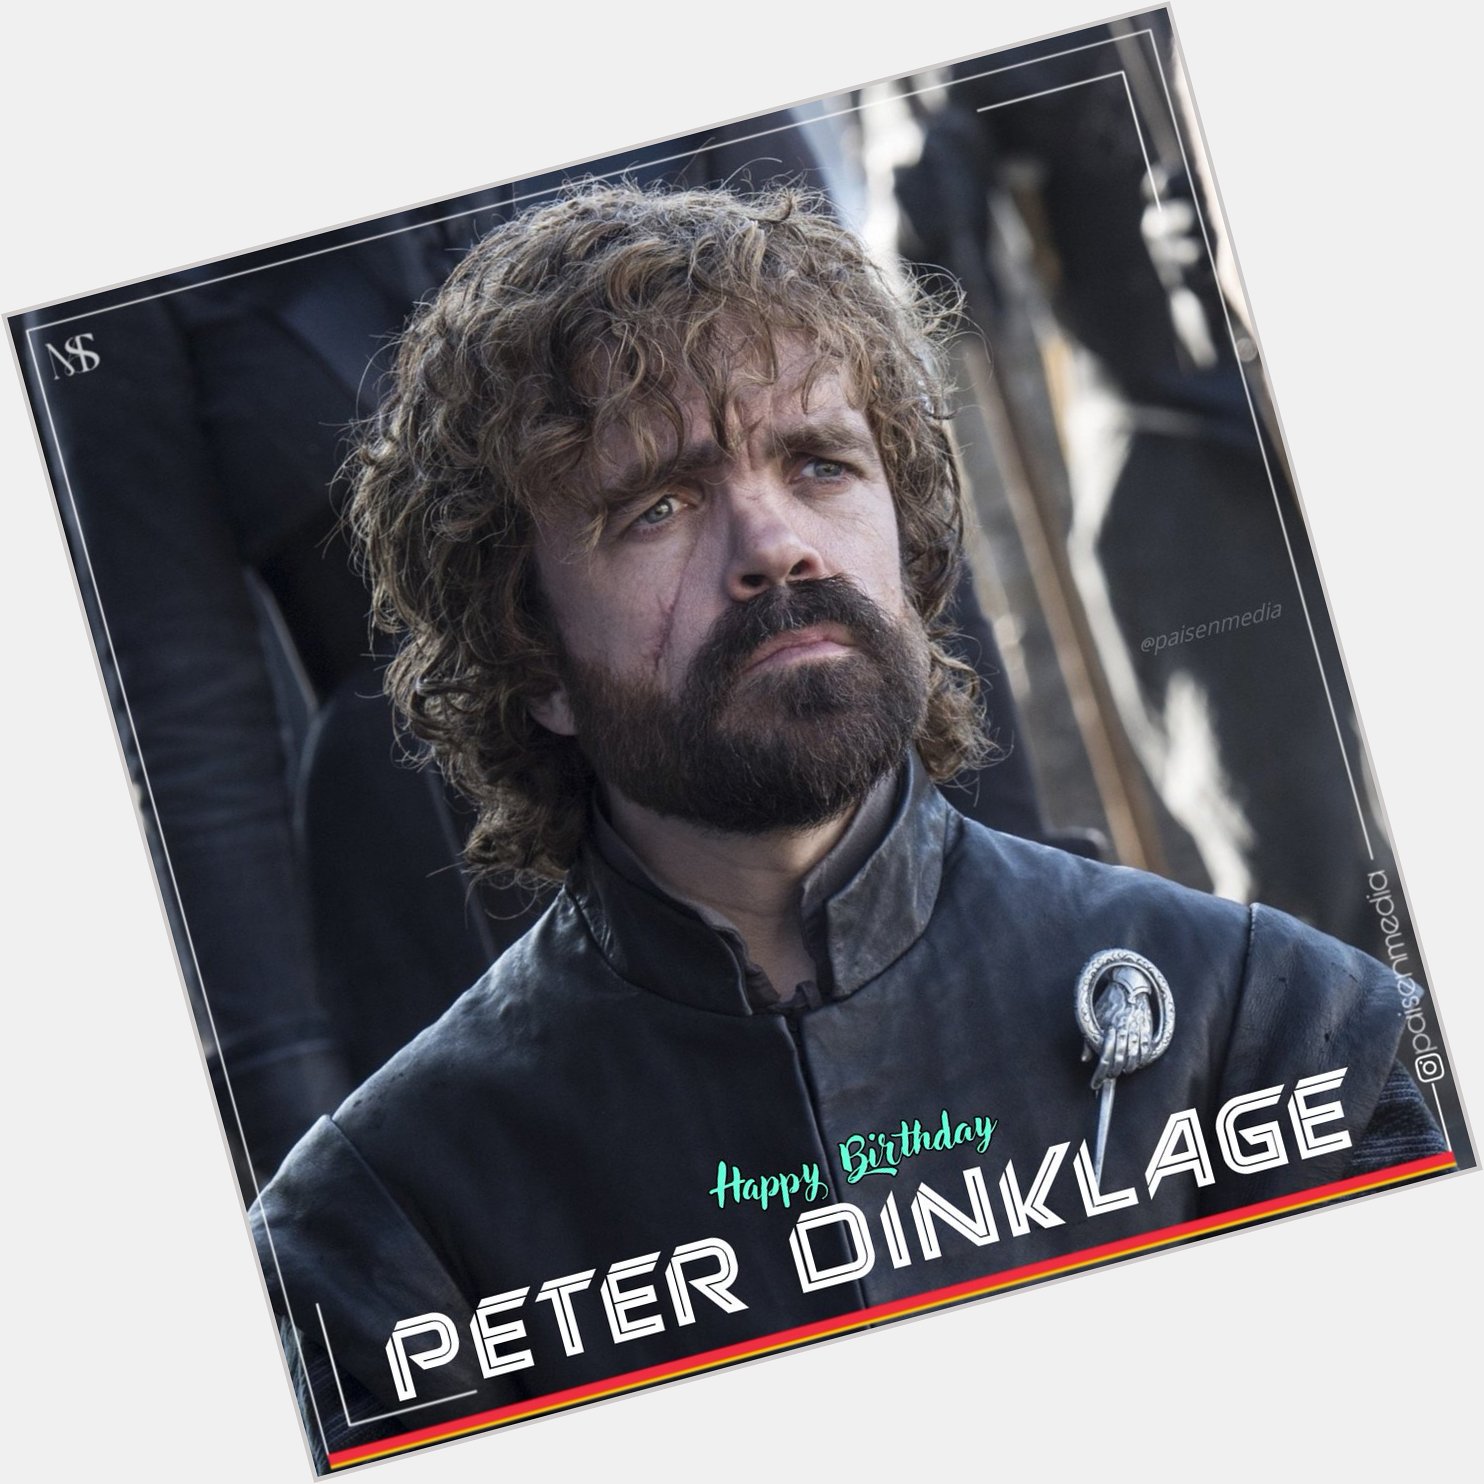 Wishing a very Happy Birthday to Peter Dinklage sir .
.
.
.  